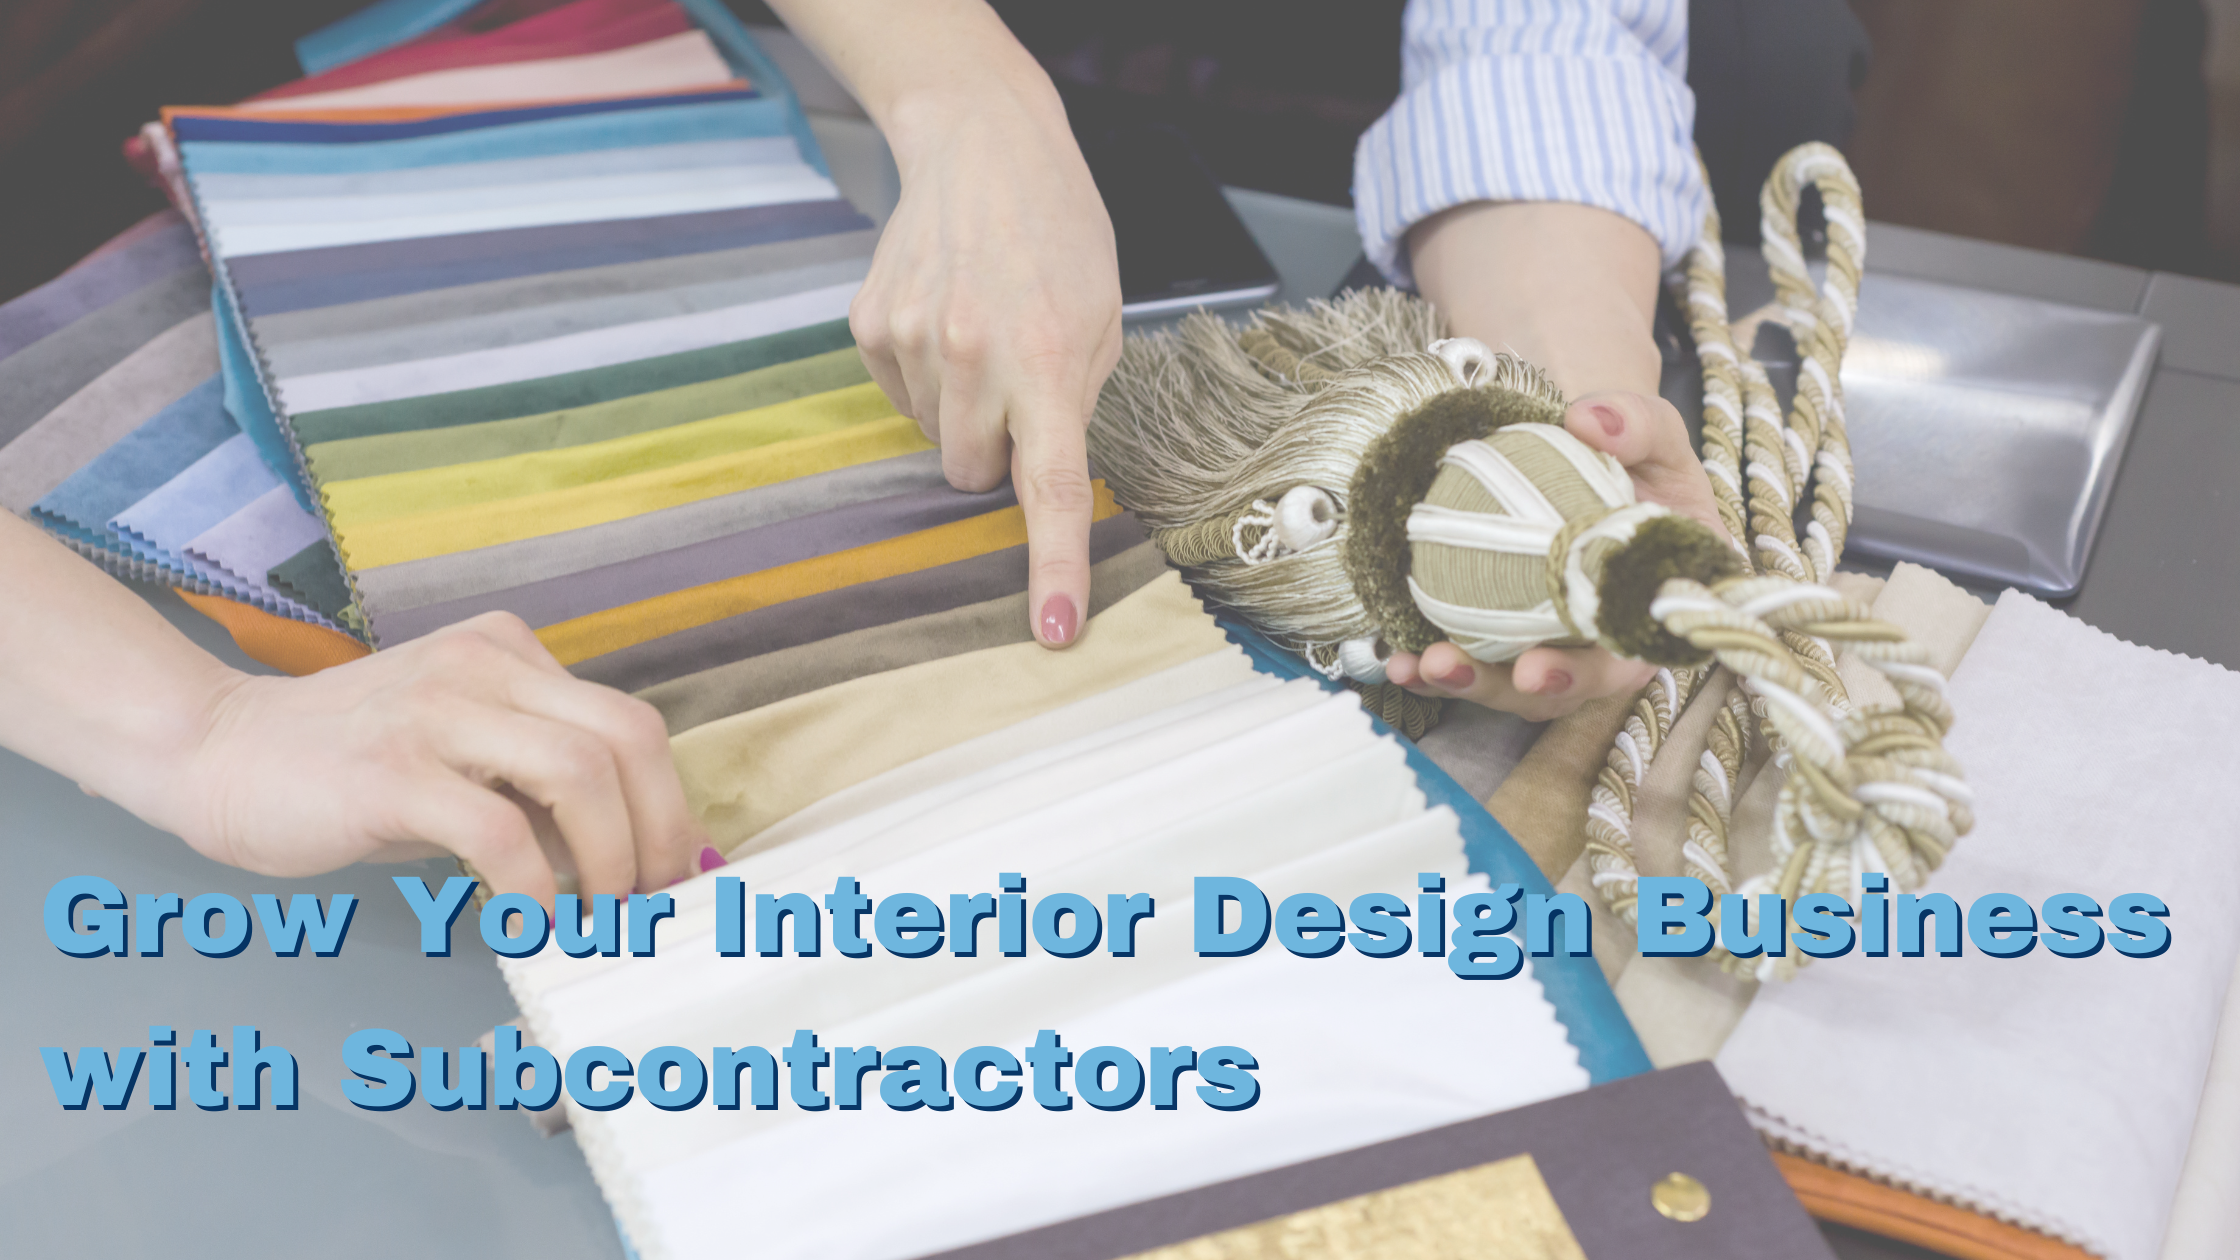 Grow Your Interior Design Business with Subcontractors